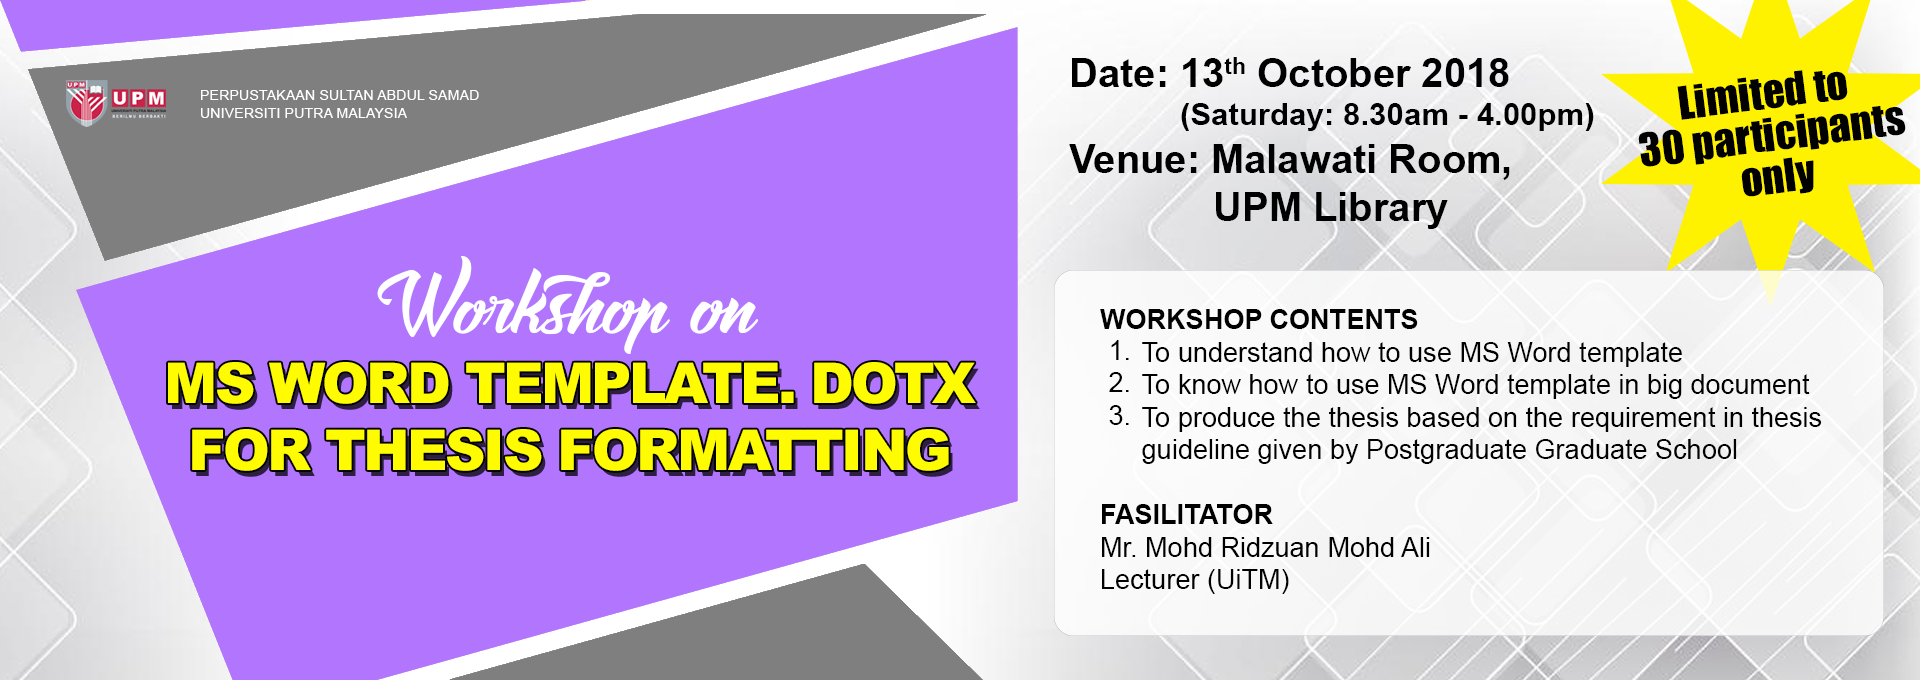 workshop-on-ms-word-template-dotx-for-thesis-formatting-portal-of